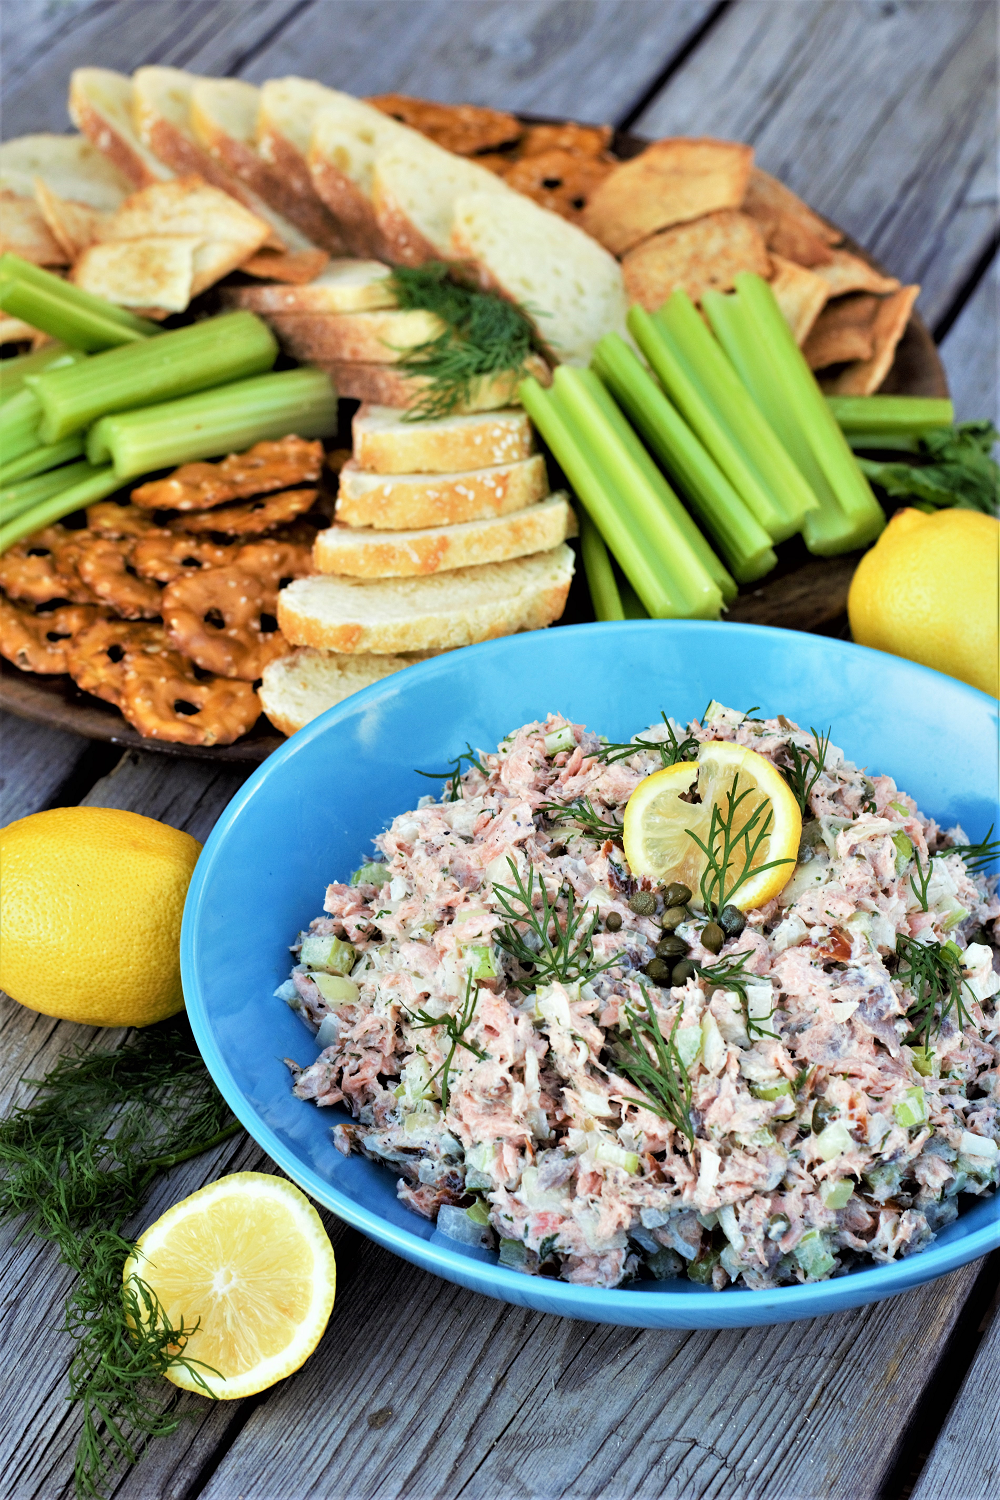 Smoked salmon dip with sweet onion, capers, and fresh dill might just be the easiest, healthiest no-cook holiday appetizer ever!